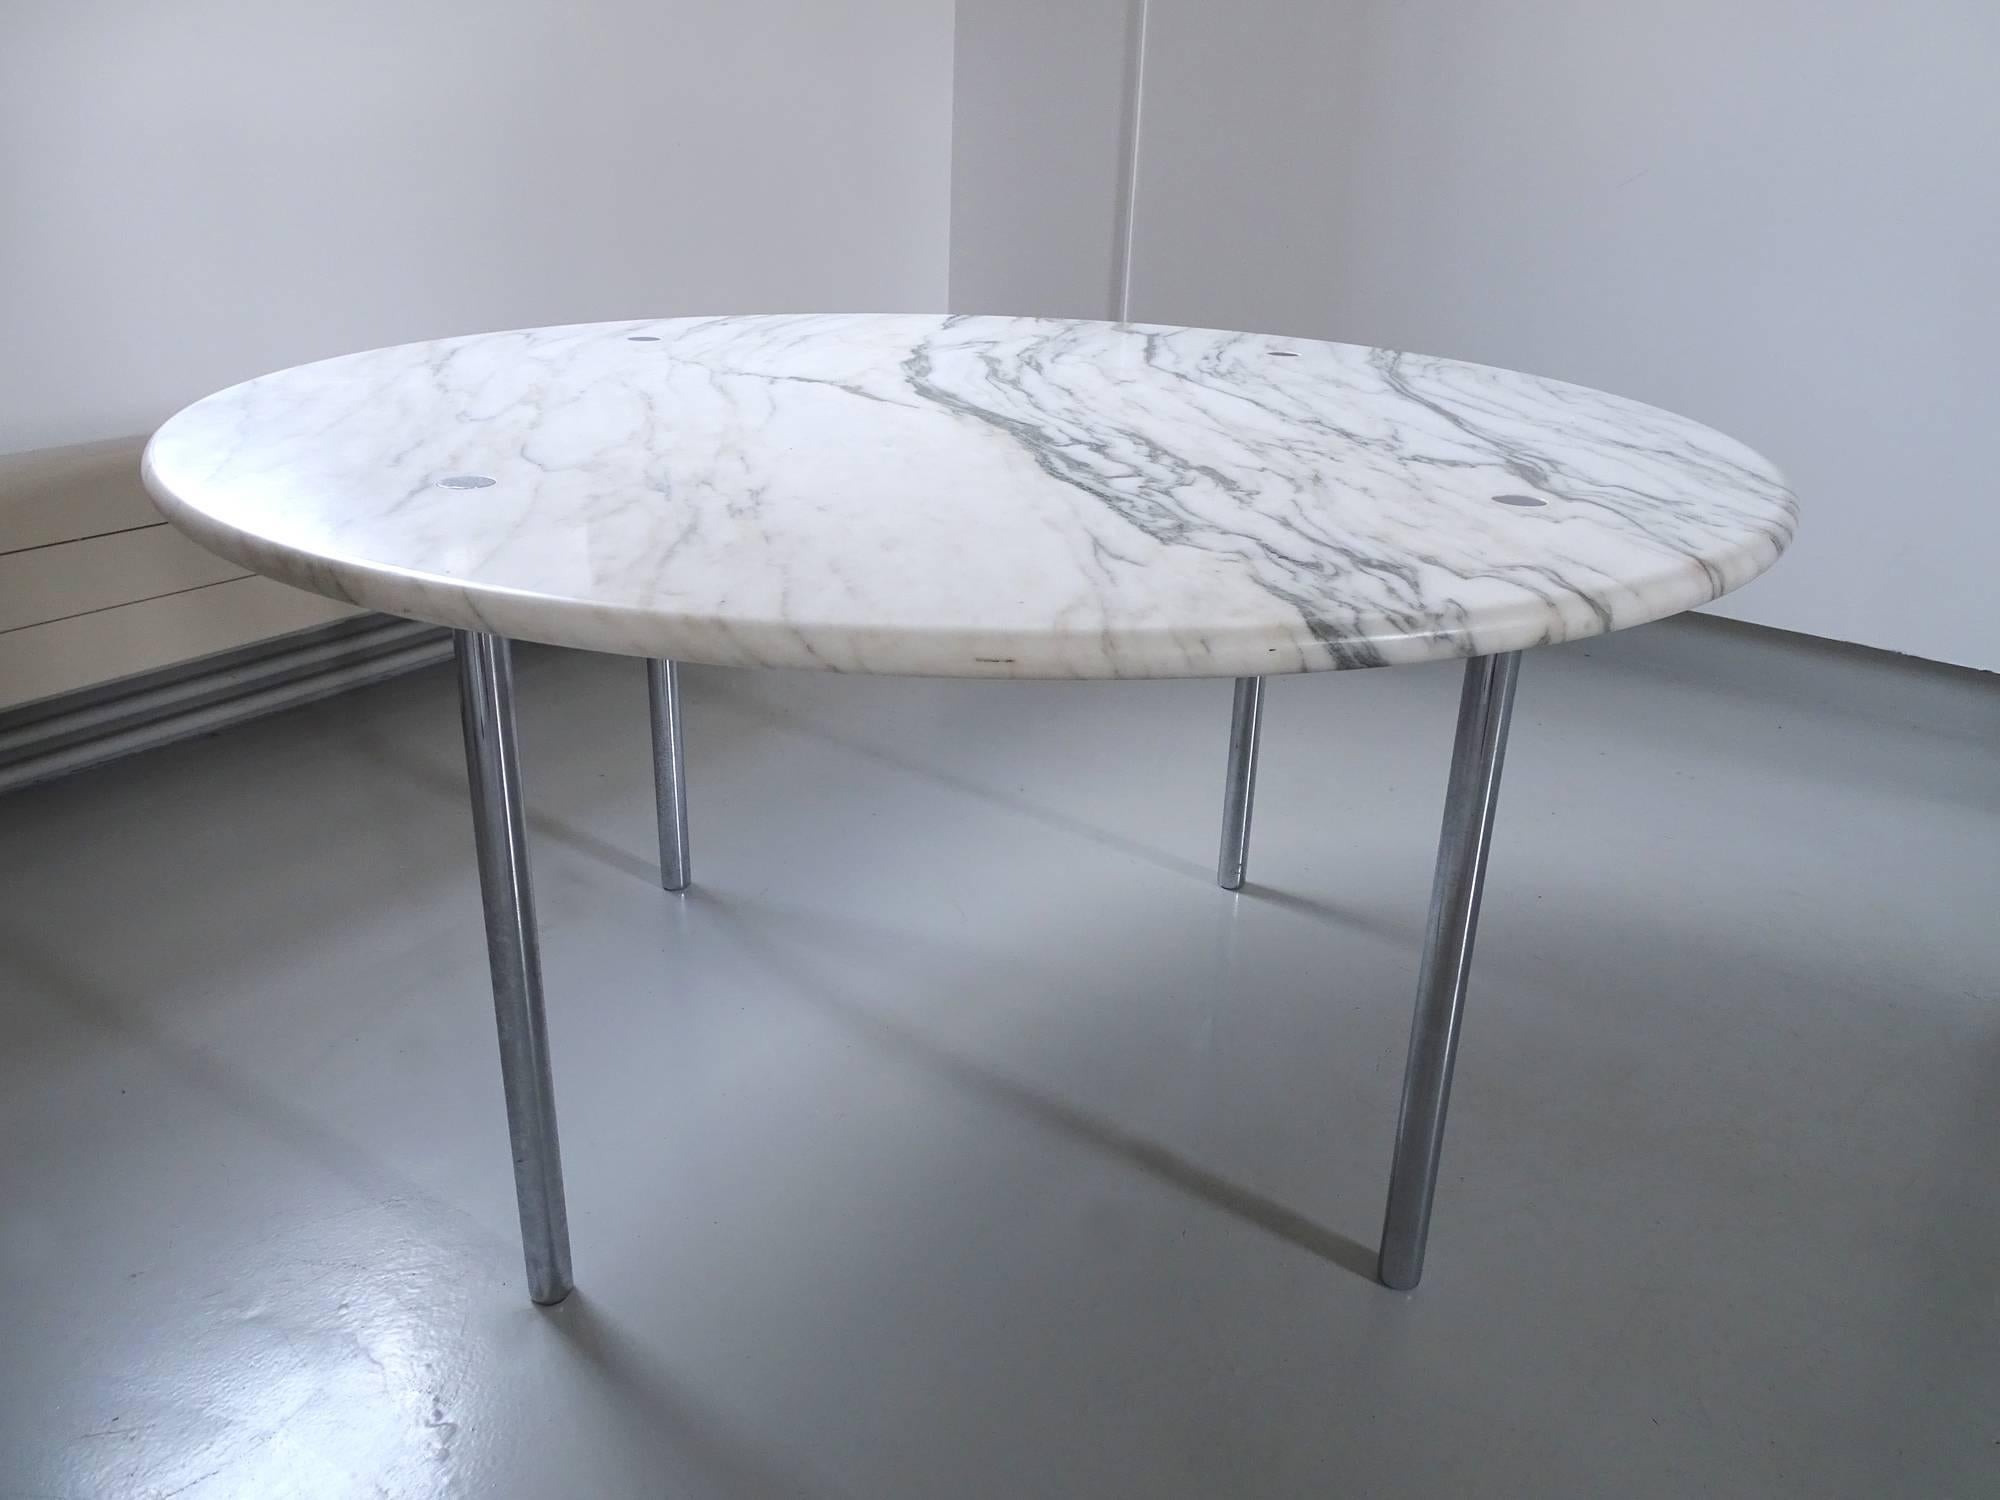 A stunning marble top dining table designed by Estelle and Erwin Laverne, USA, 1950s. The table has a solid 3 cm thick marble top with inset chrome-plated steel legs.
The tubular chrome legs are secured to the underside by a steel Sub-frame. The